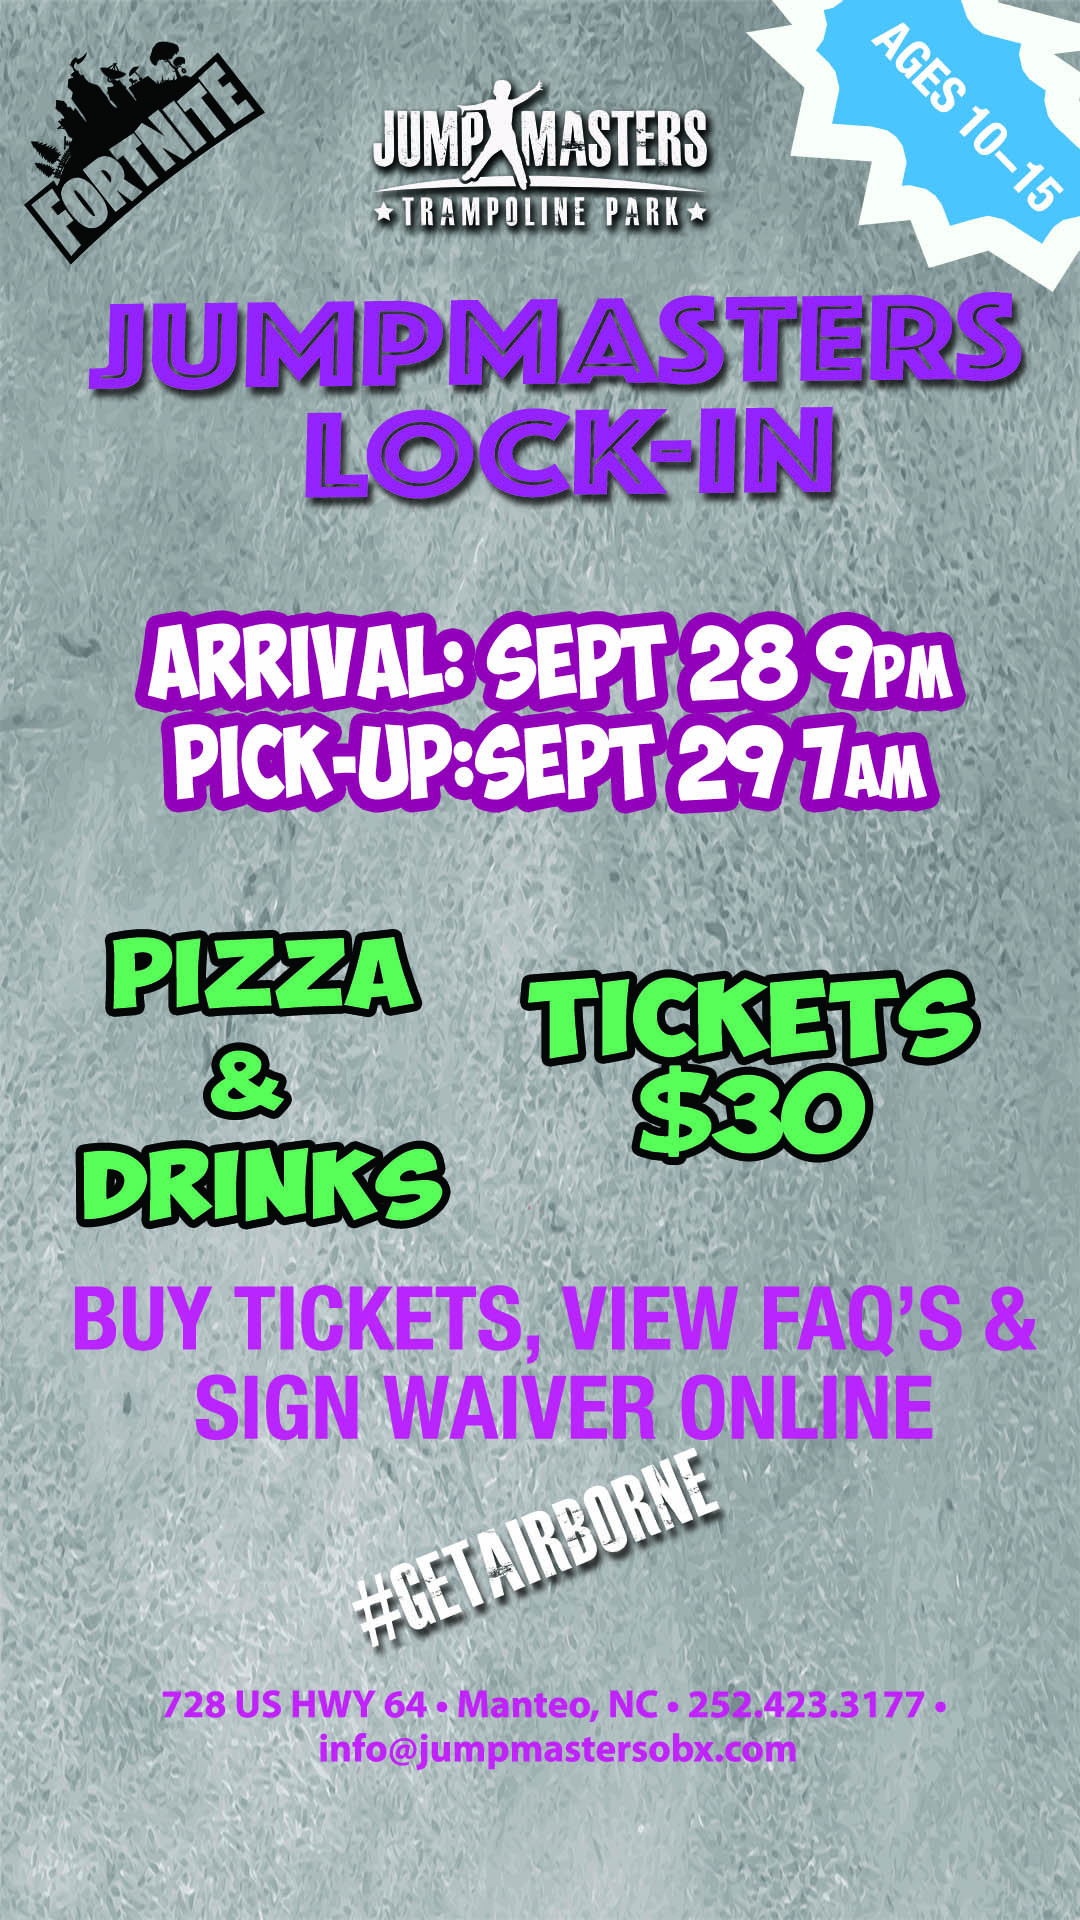 Sept 28, 2018 Lock in at Jumpmasters Trampoline Park